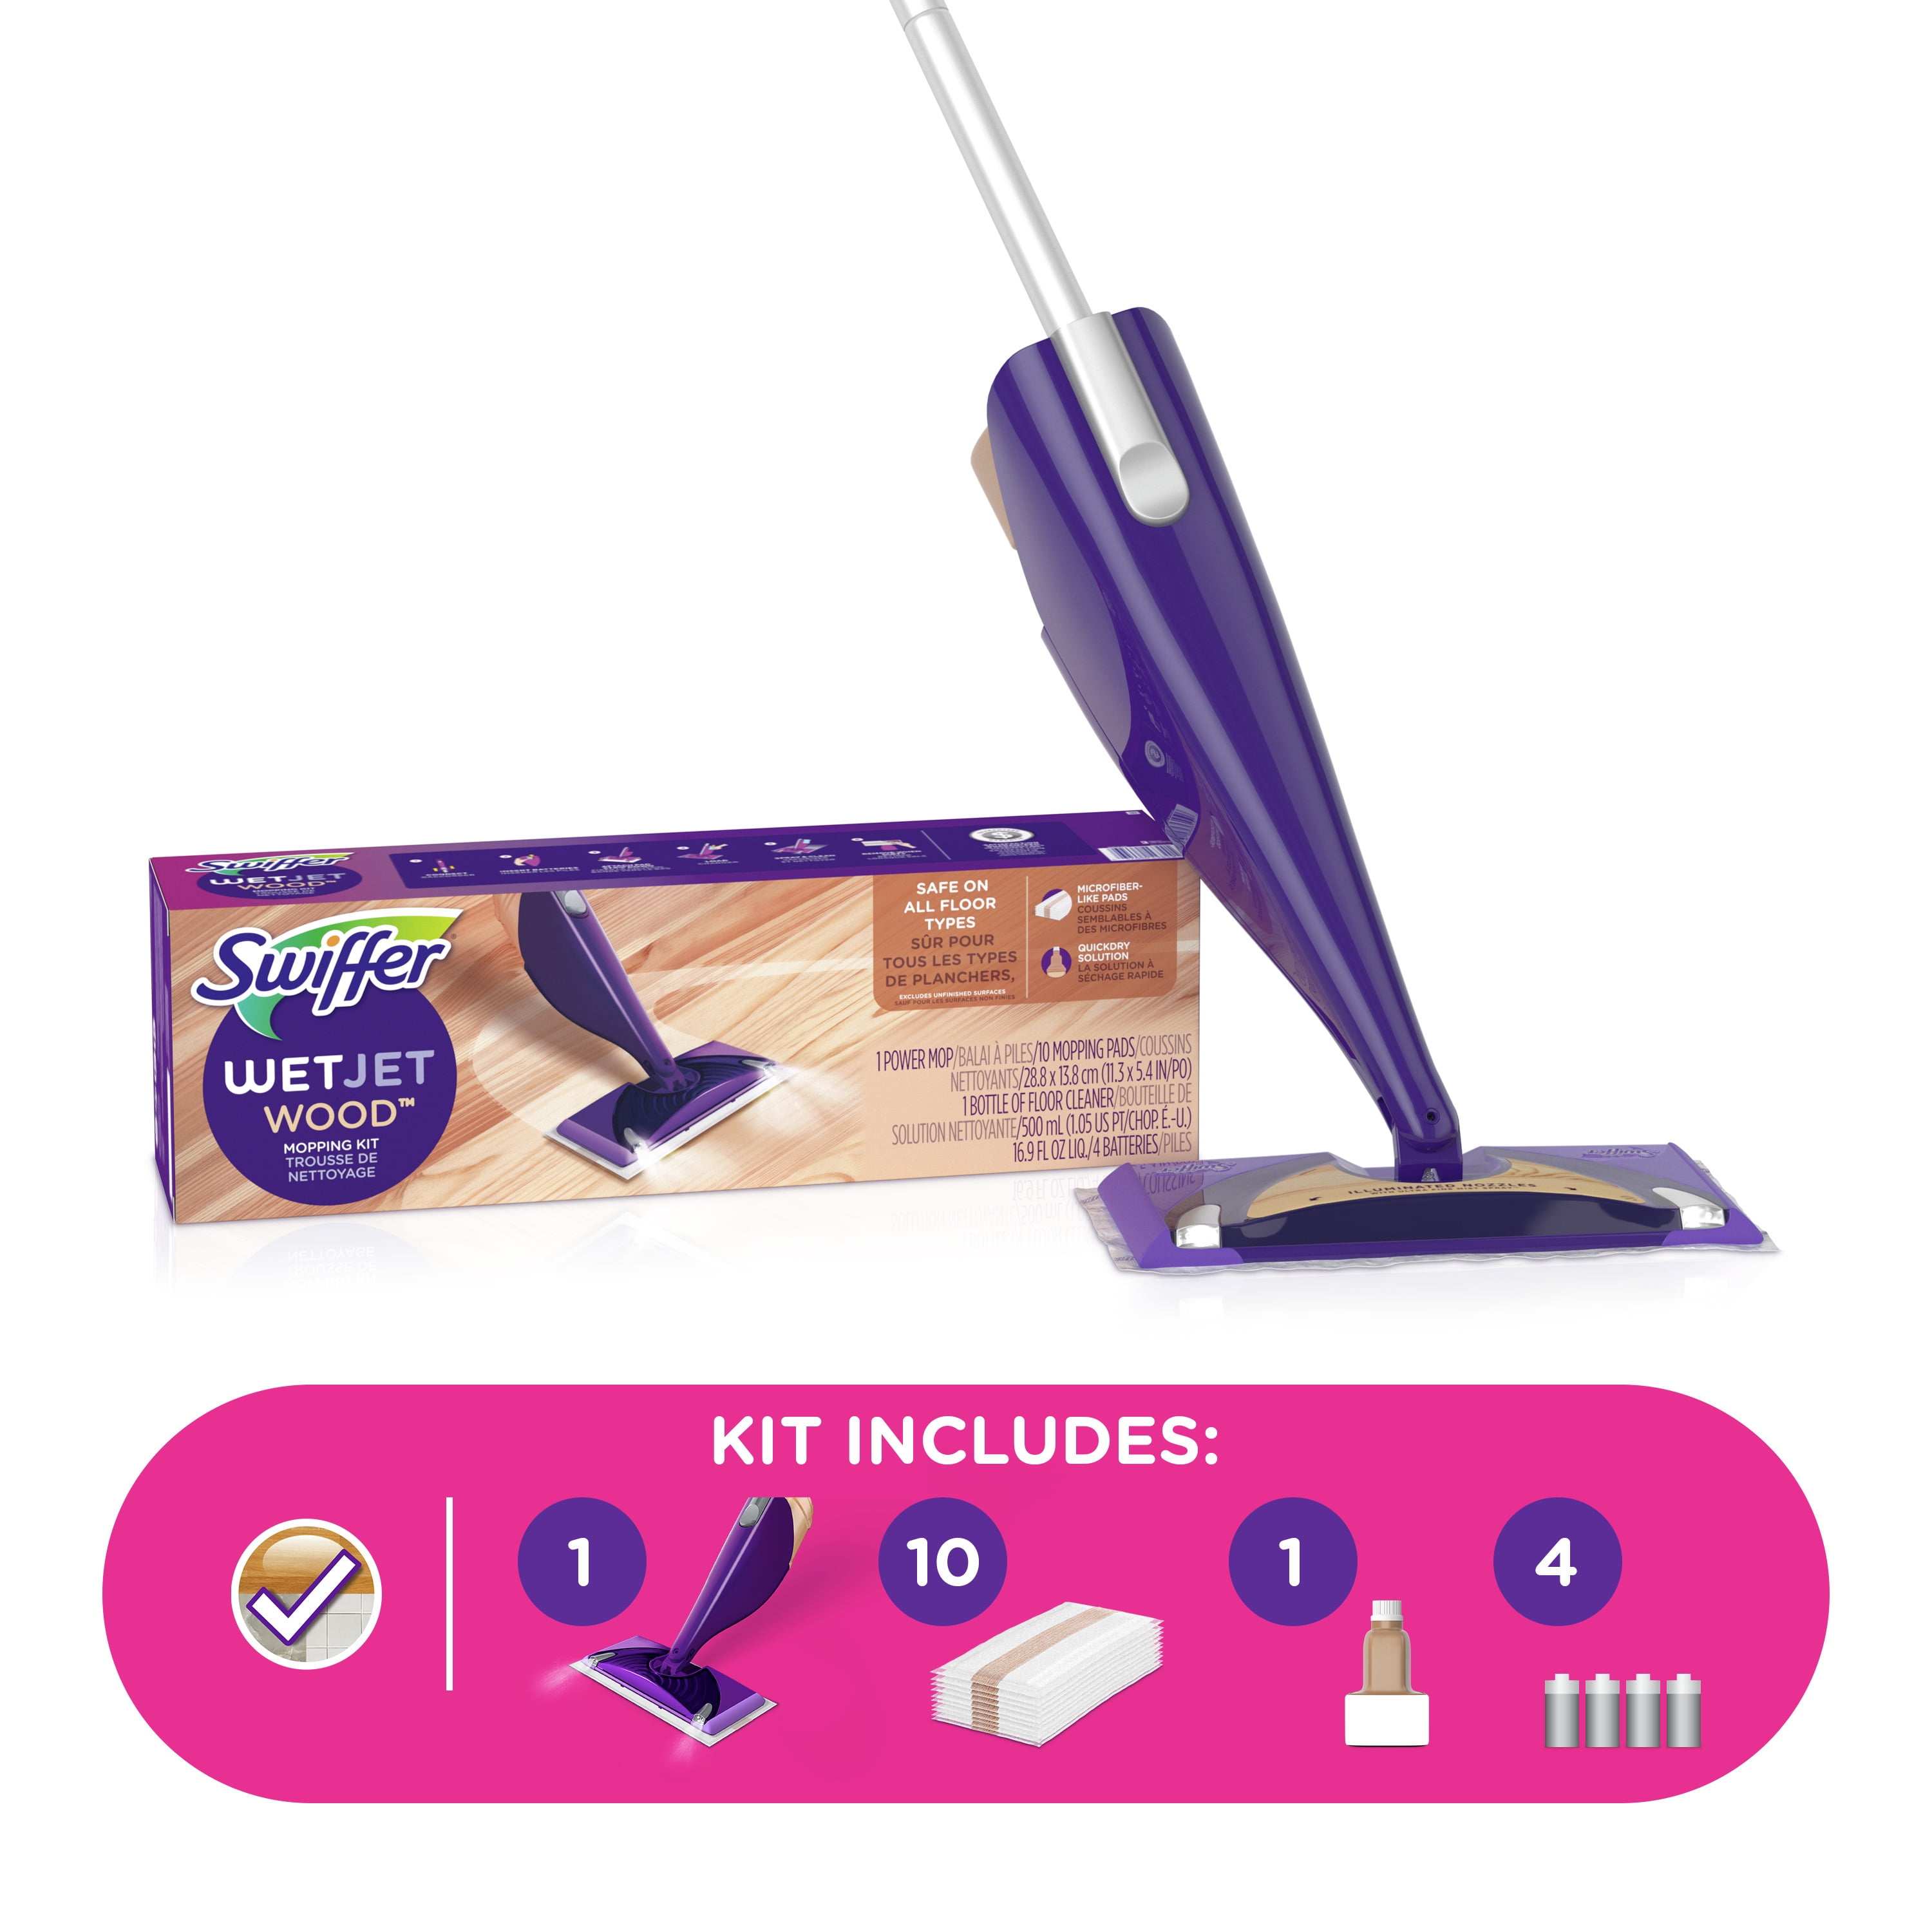 Swiffer WetJet Hardwood and Floor Spray Mop Cleaner Starter Kit, Includes:  1 Power Mop, 10 Pads, Cleaning Solution, Batteries